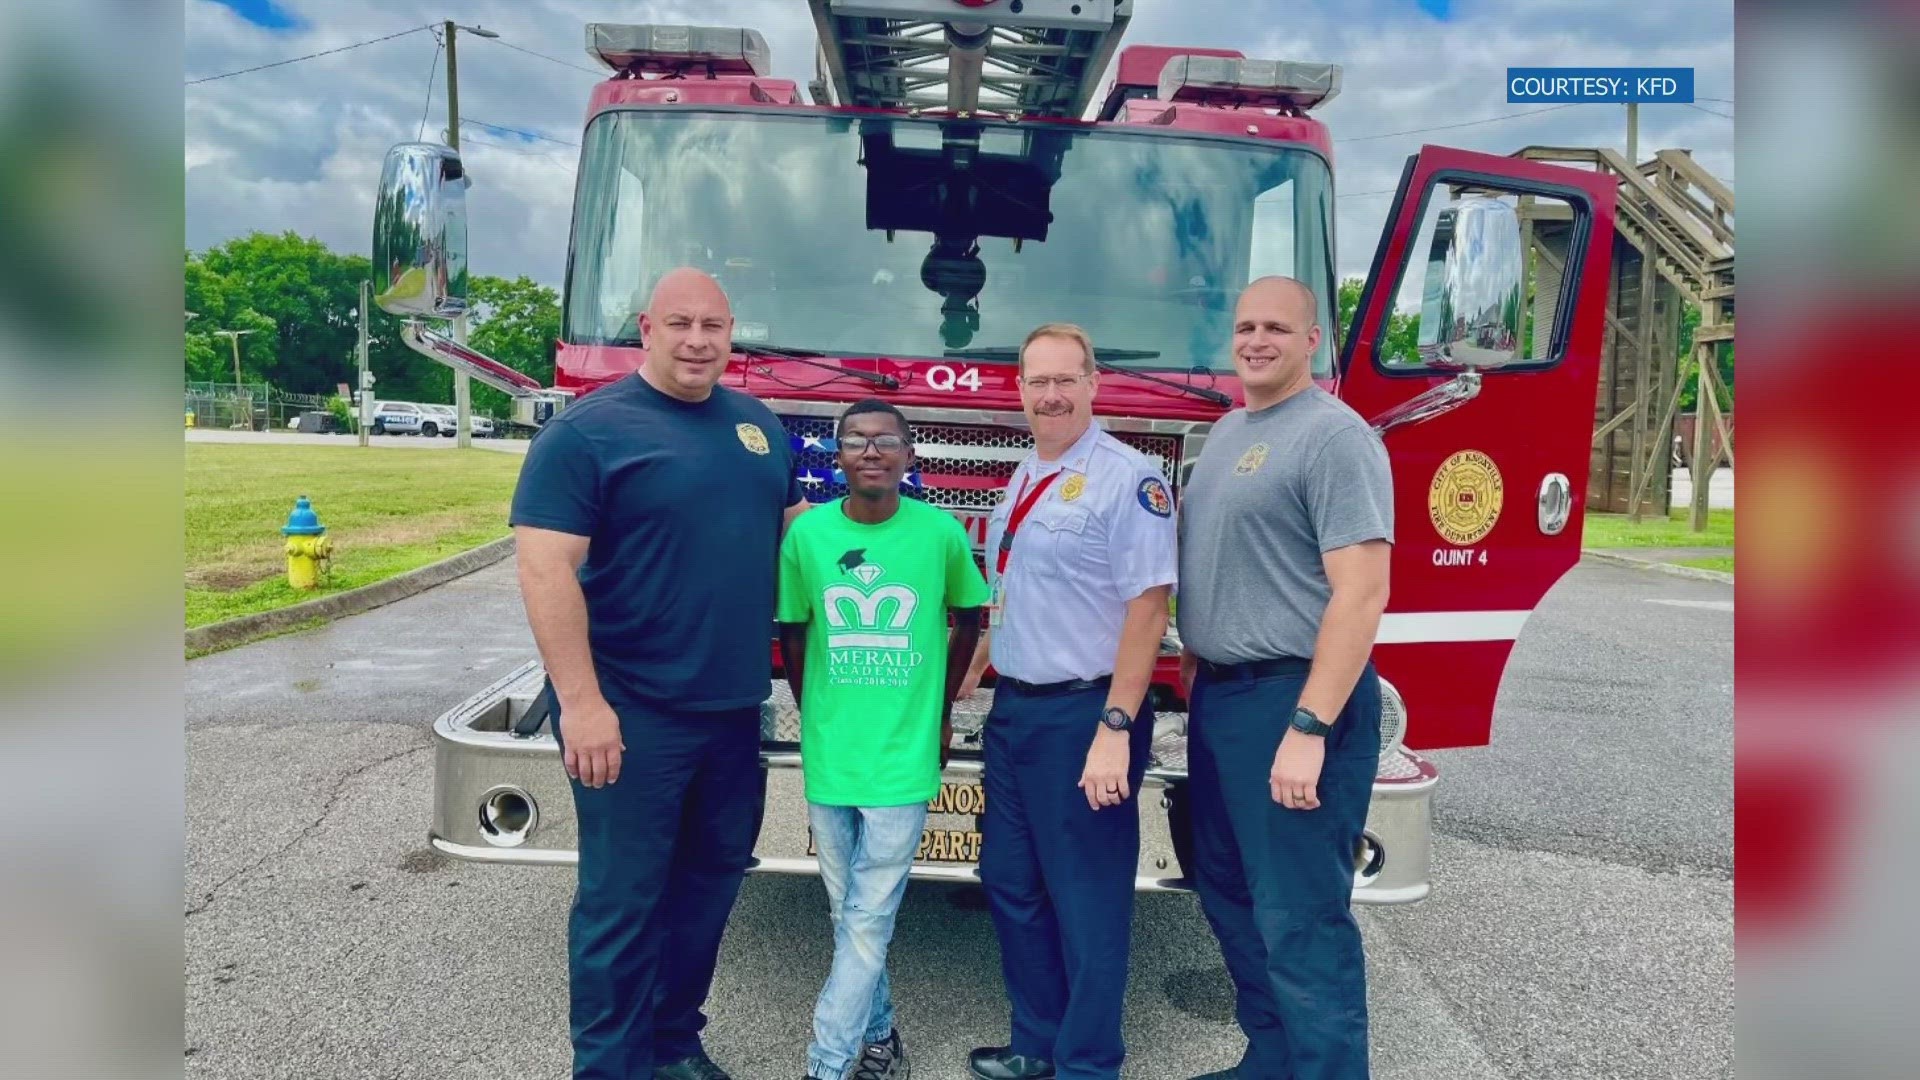 Time sure can fly! OT Harris is working as a summer intern with the same KFD crew that helped deliver him back in 2005.